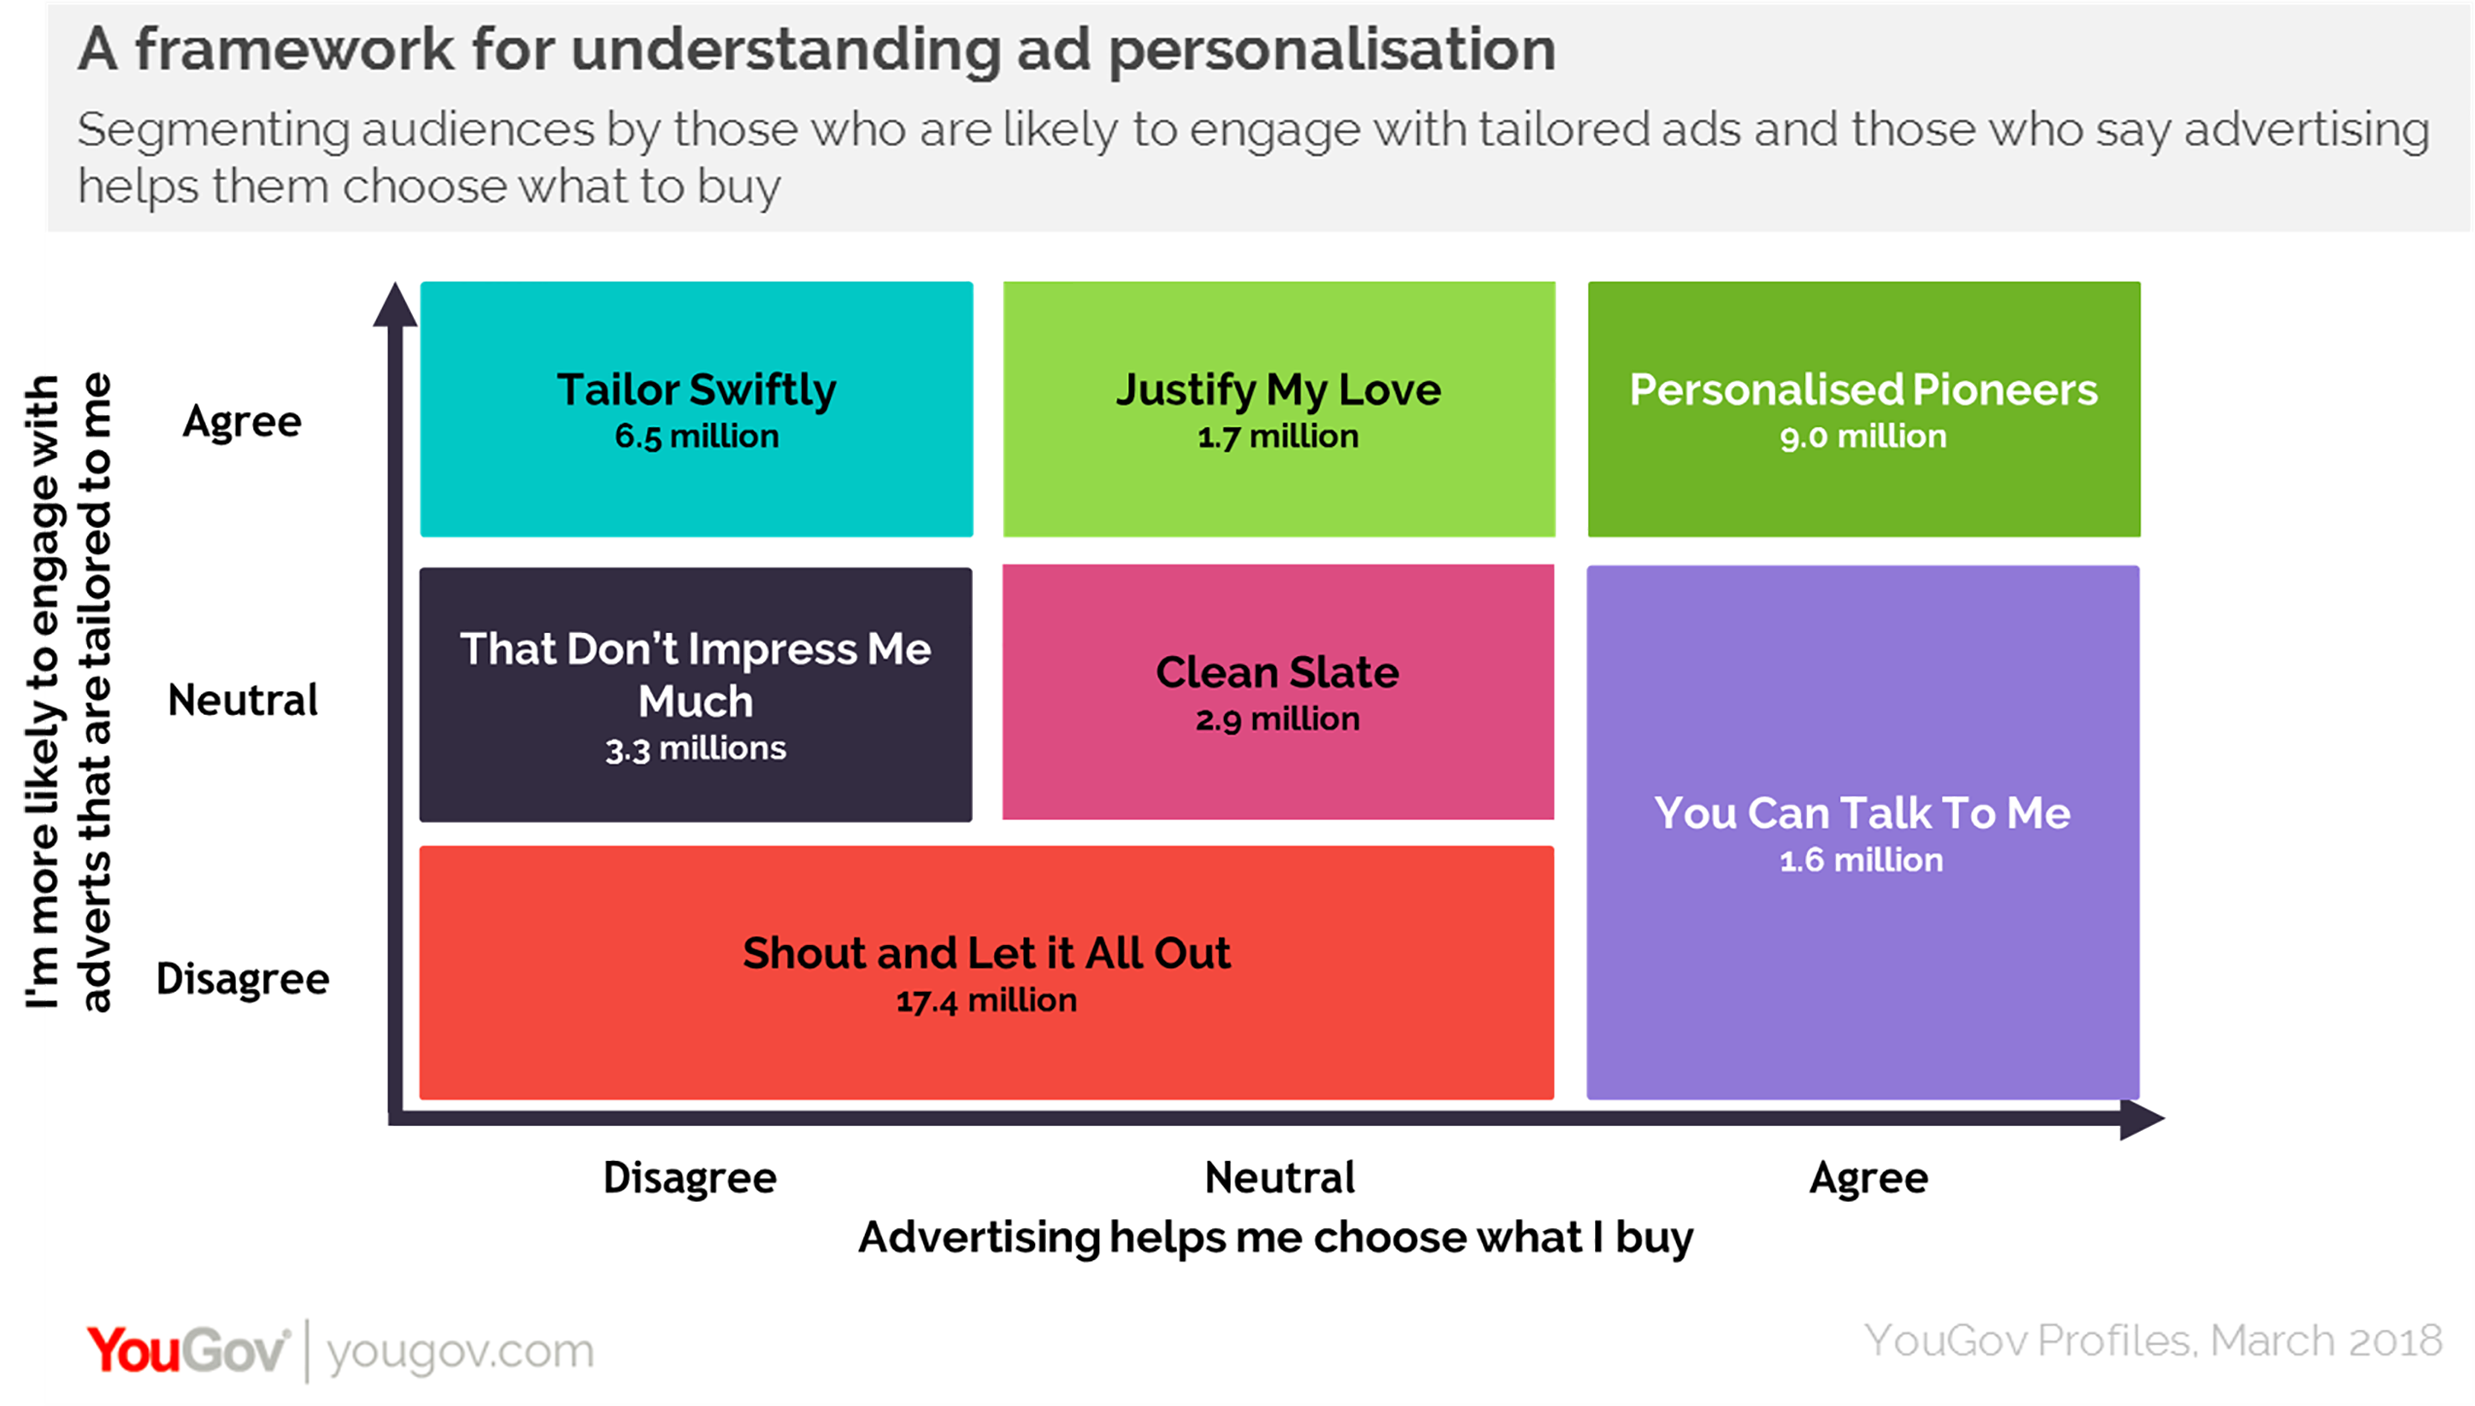 Targeting personalised ads to the right audience | YouGov